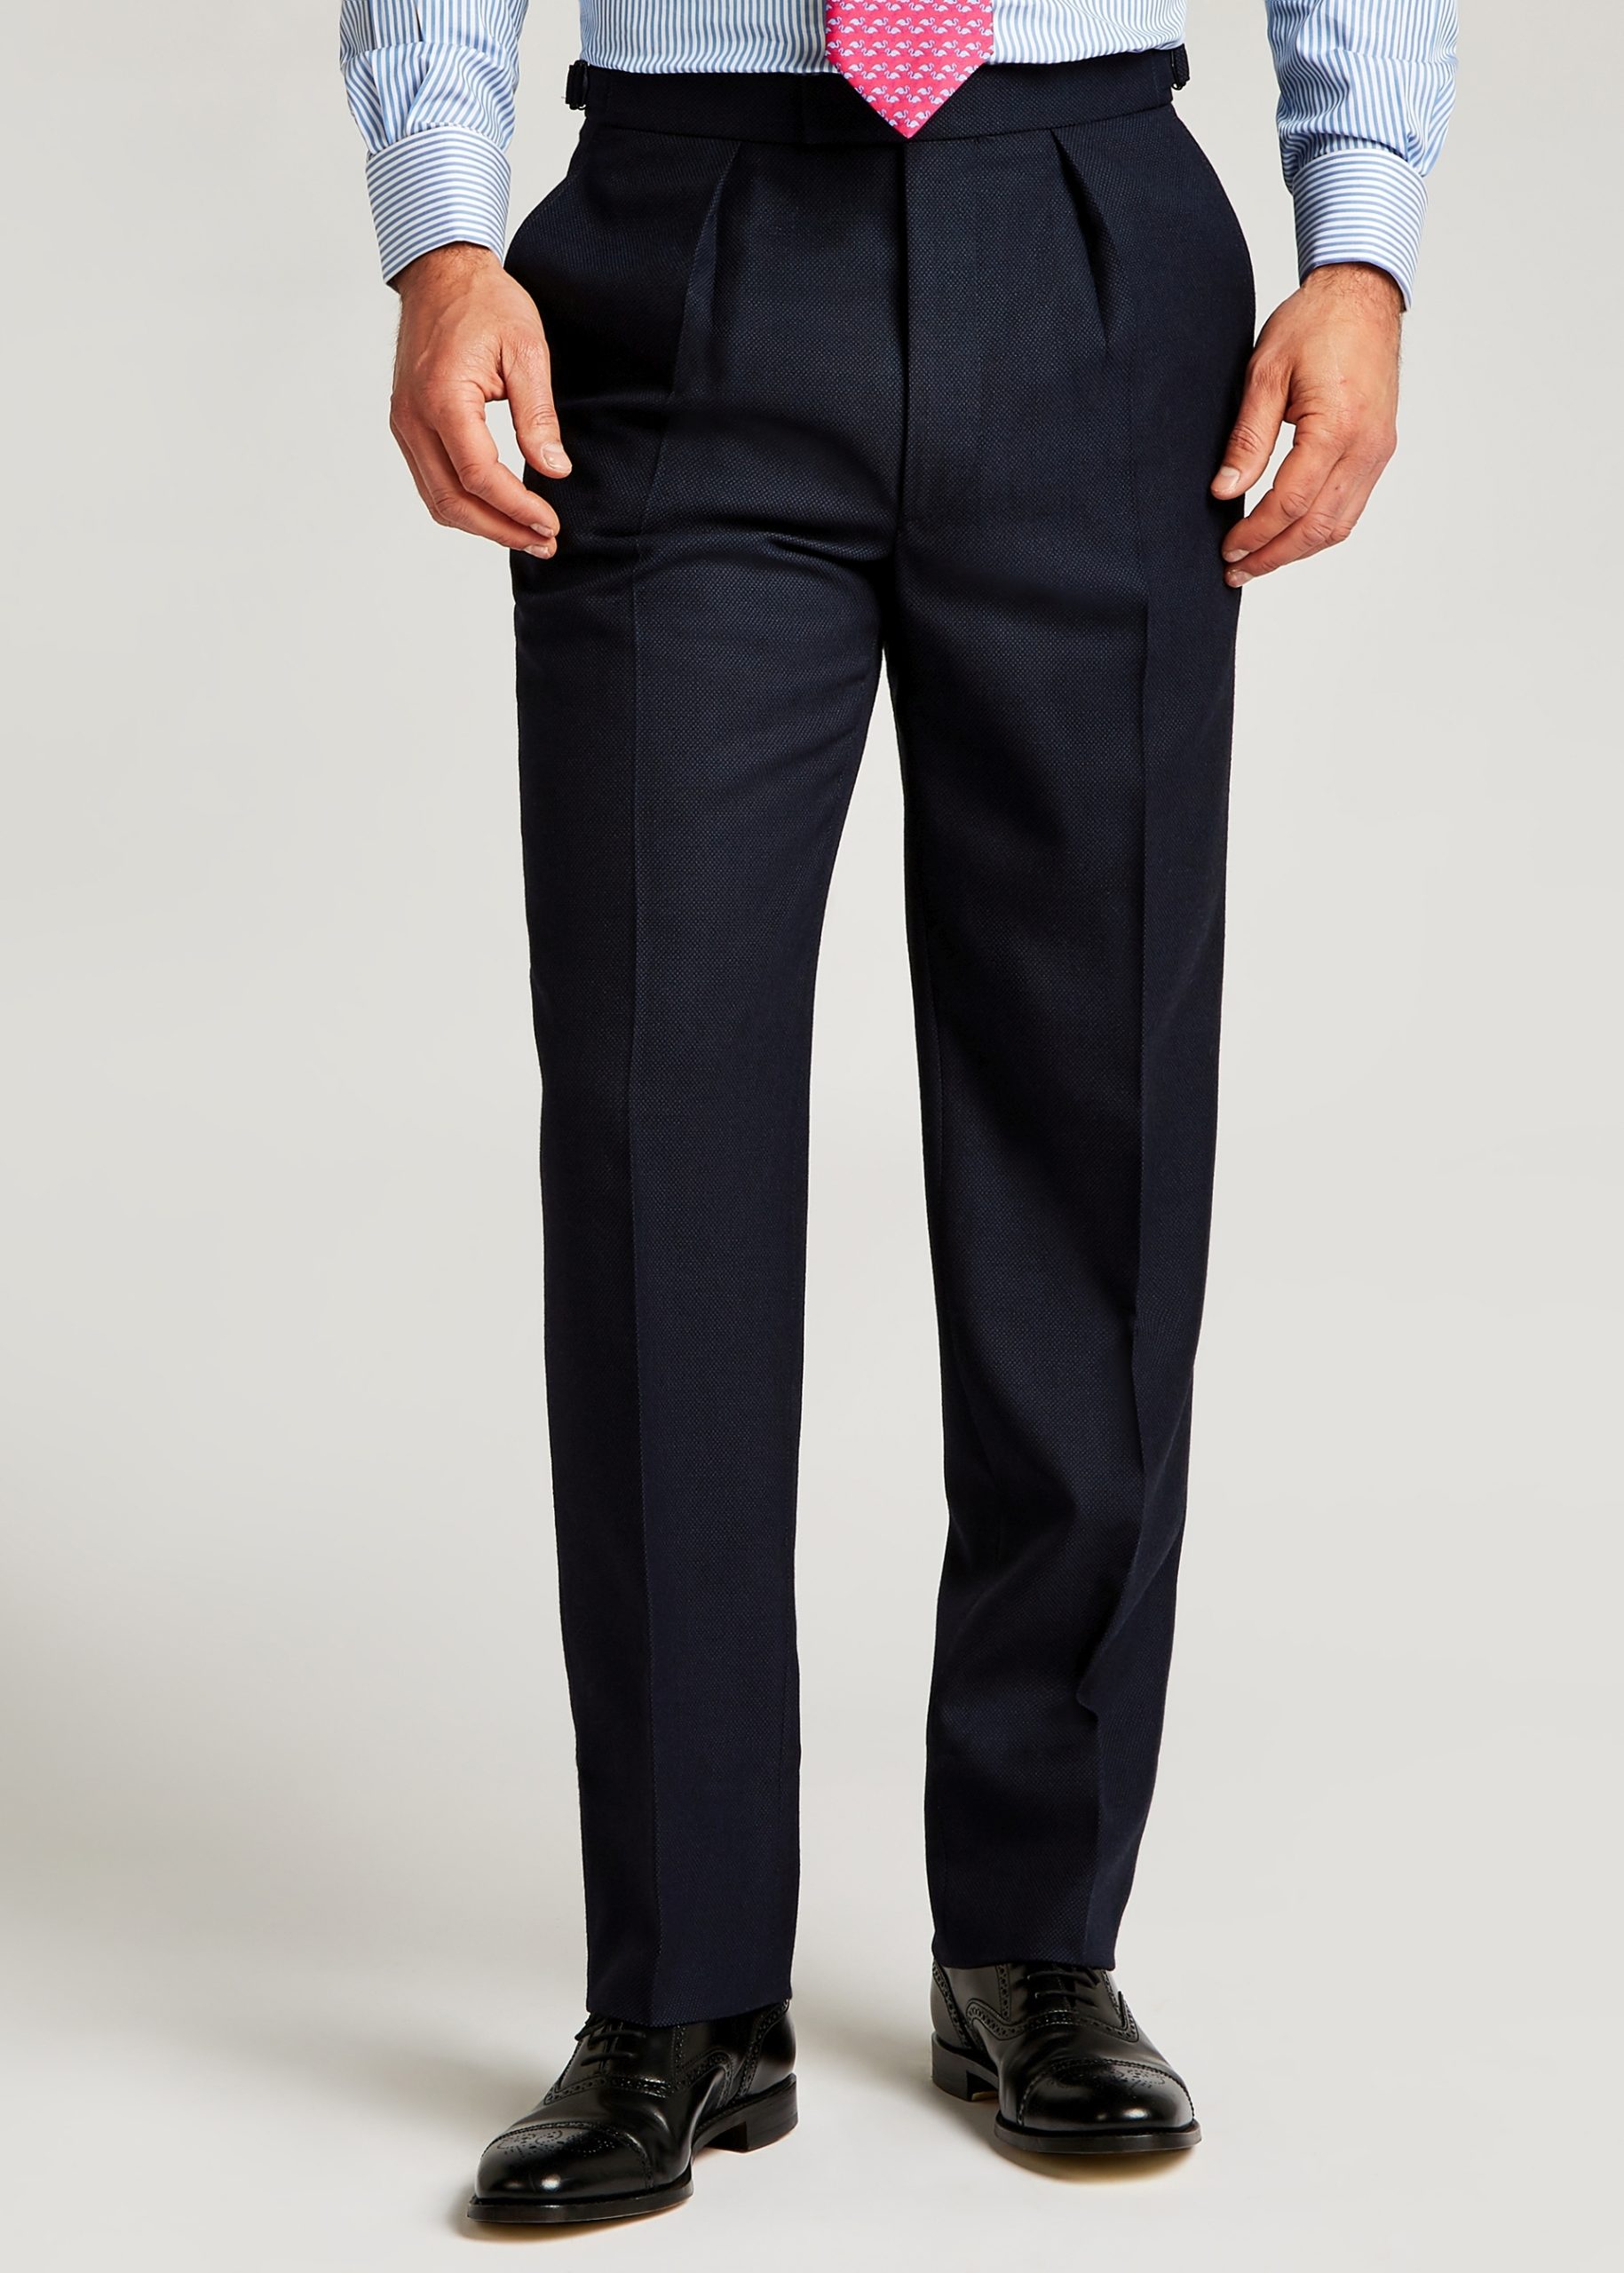 Roderick Charles navy suit trousers